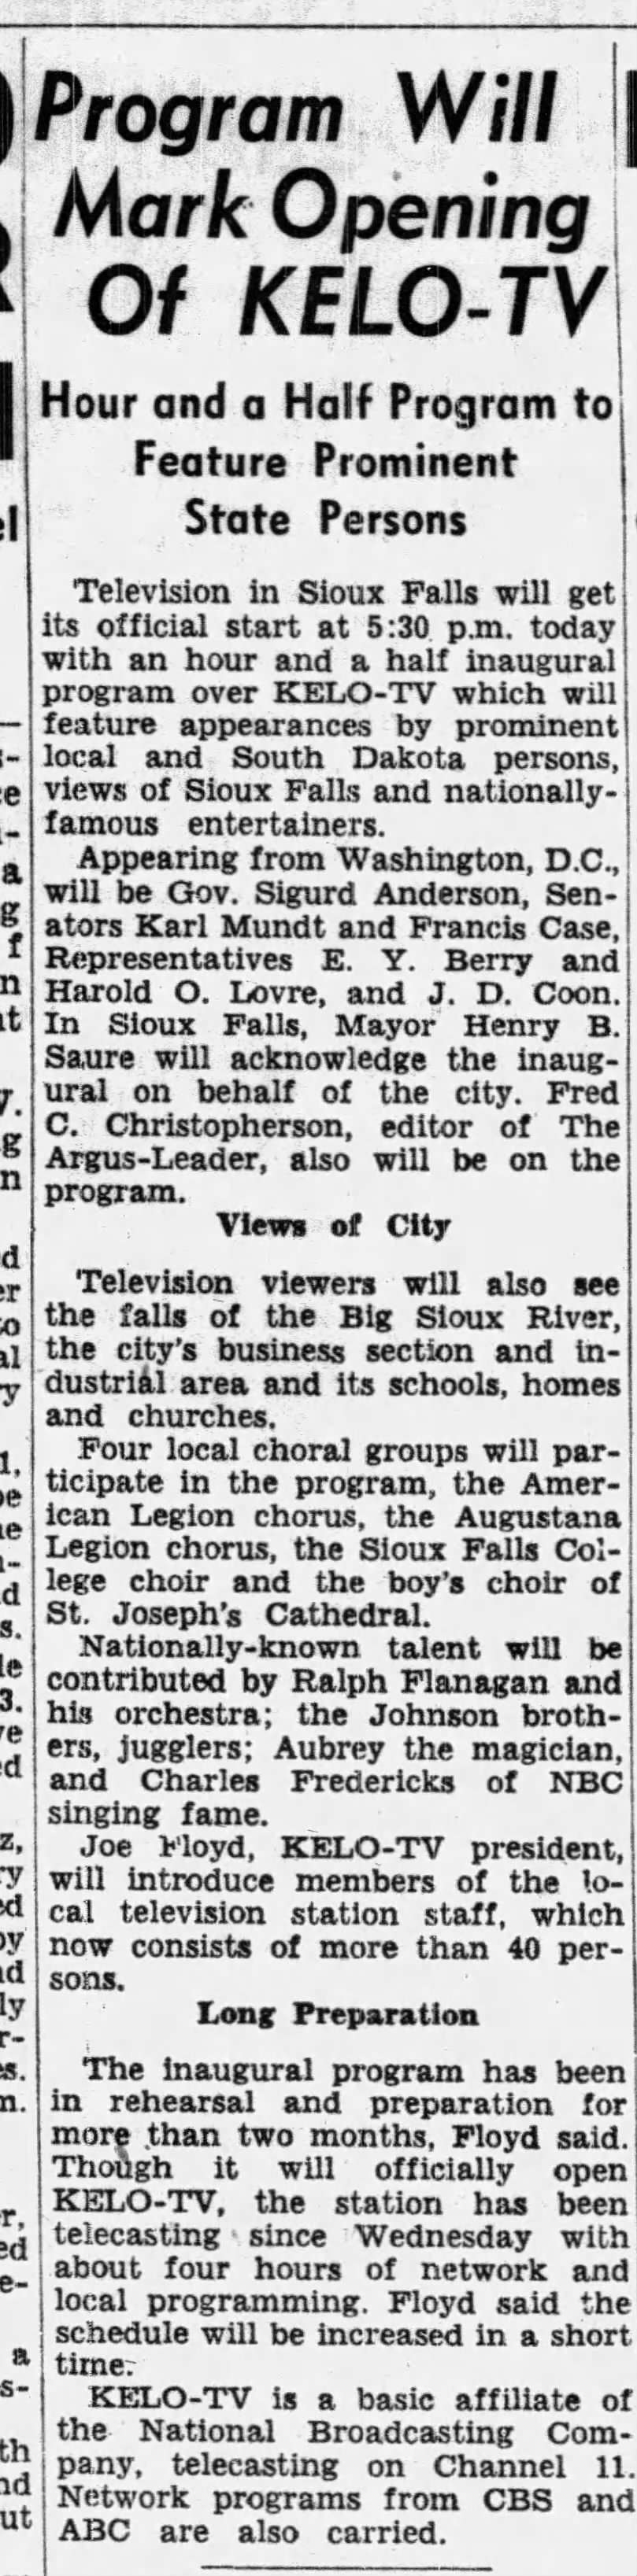 Program Will Mark Opening Of KELO-TV: Hour and a Half Program to Feature Prominent State Persons